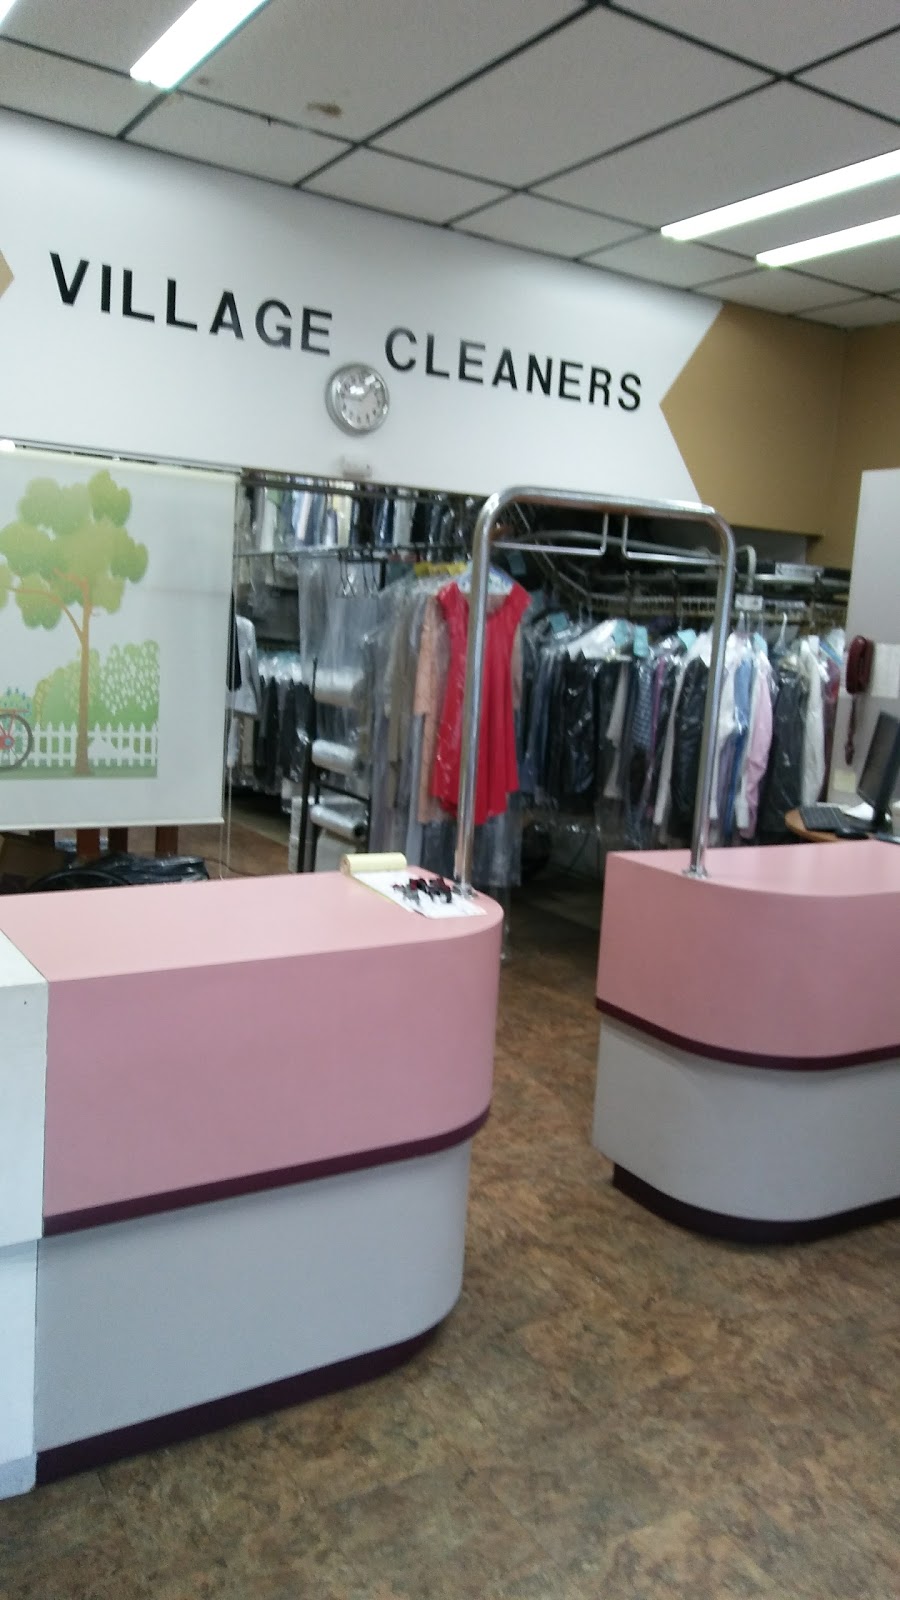 Village Cleaners | 1393 Brentwood Rd, Bay Shore, NY 11706 | Phone: (631) 665-2207